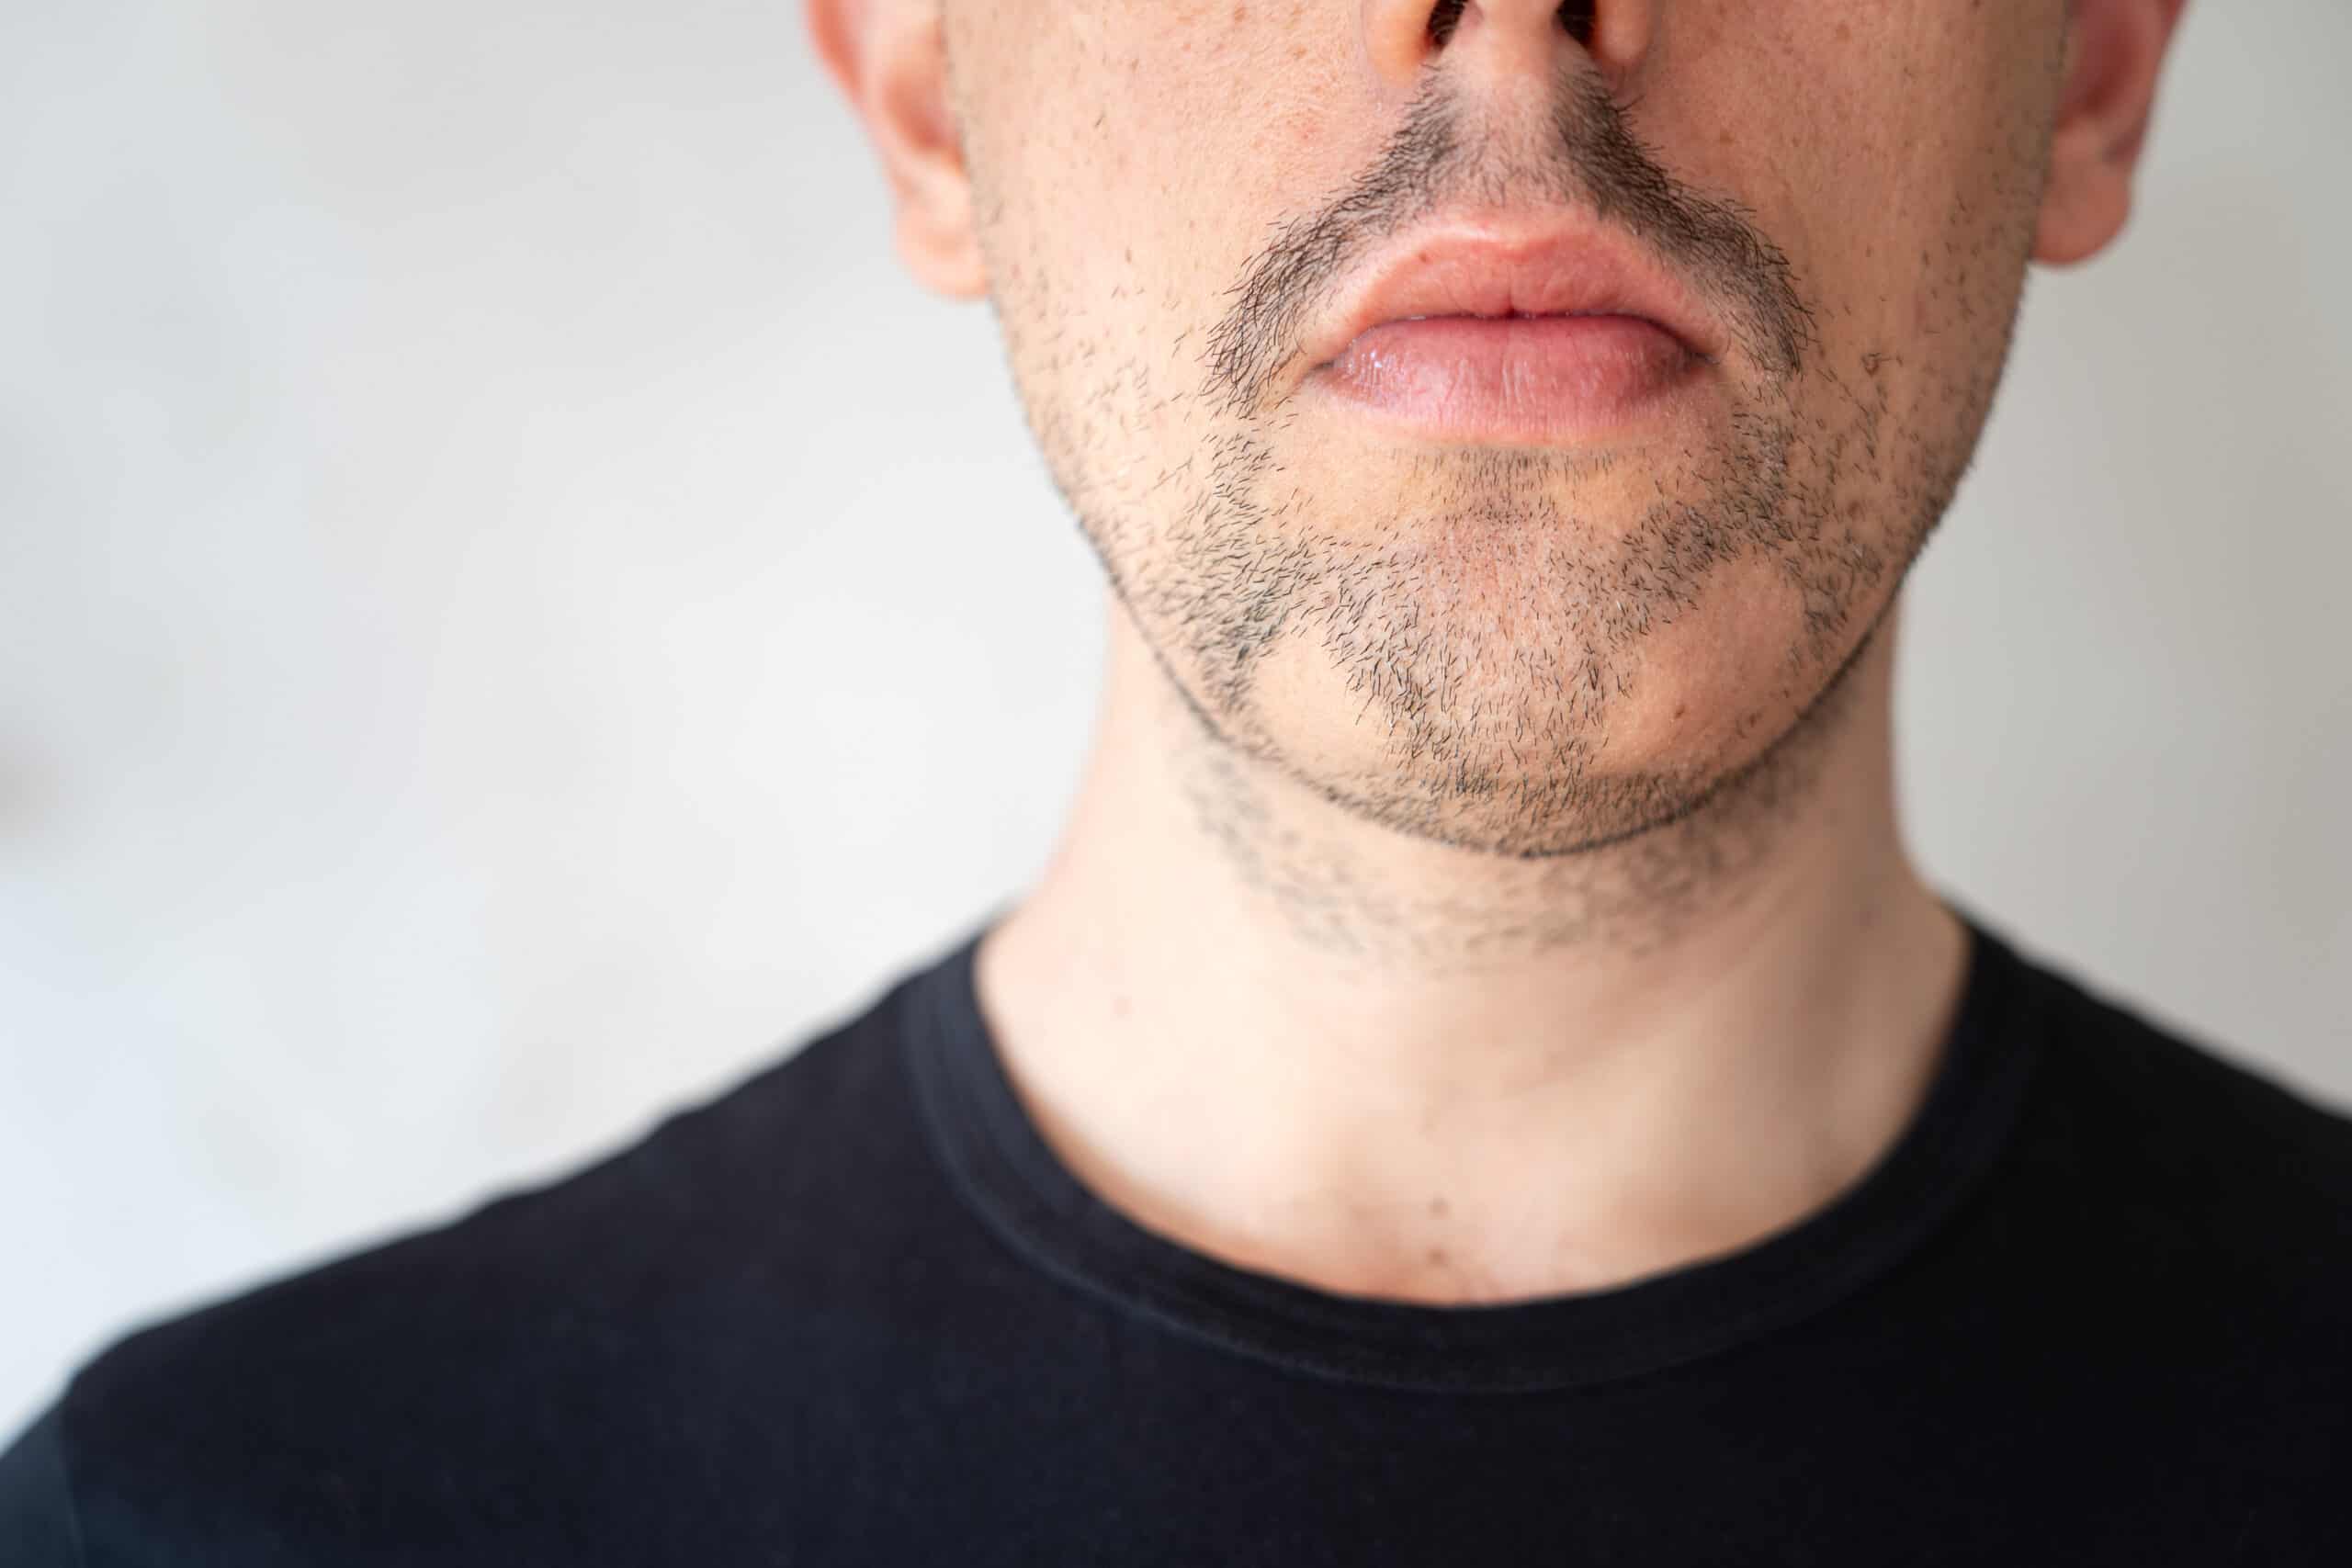 Can't grow a full beard? Try another facial hair option.